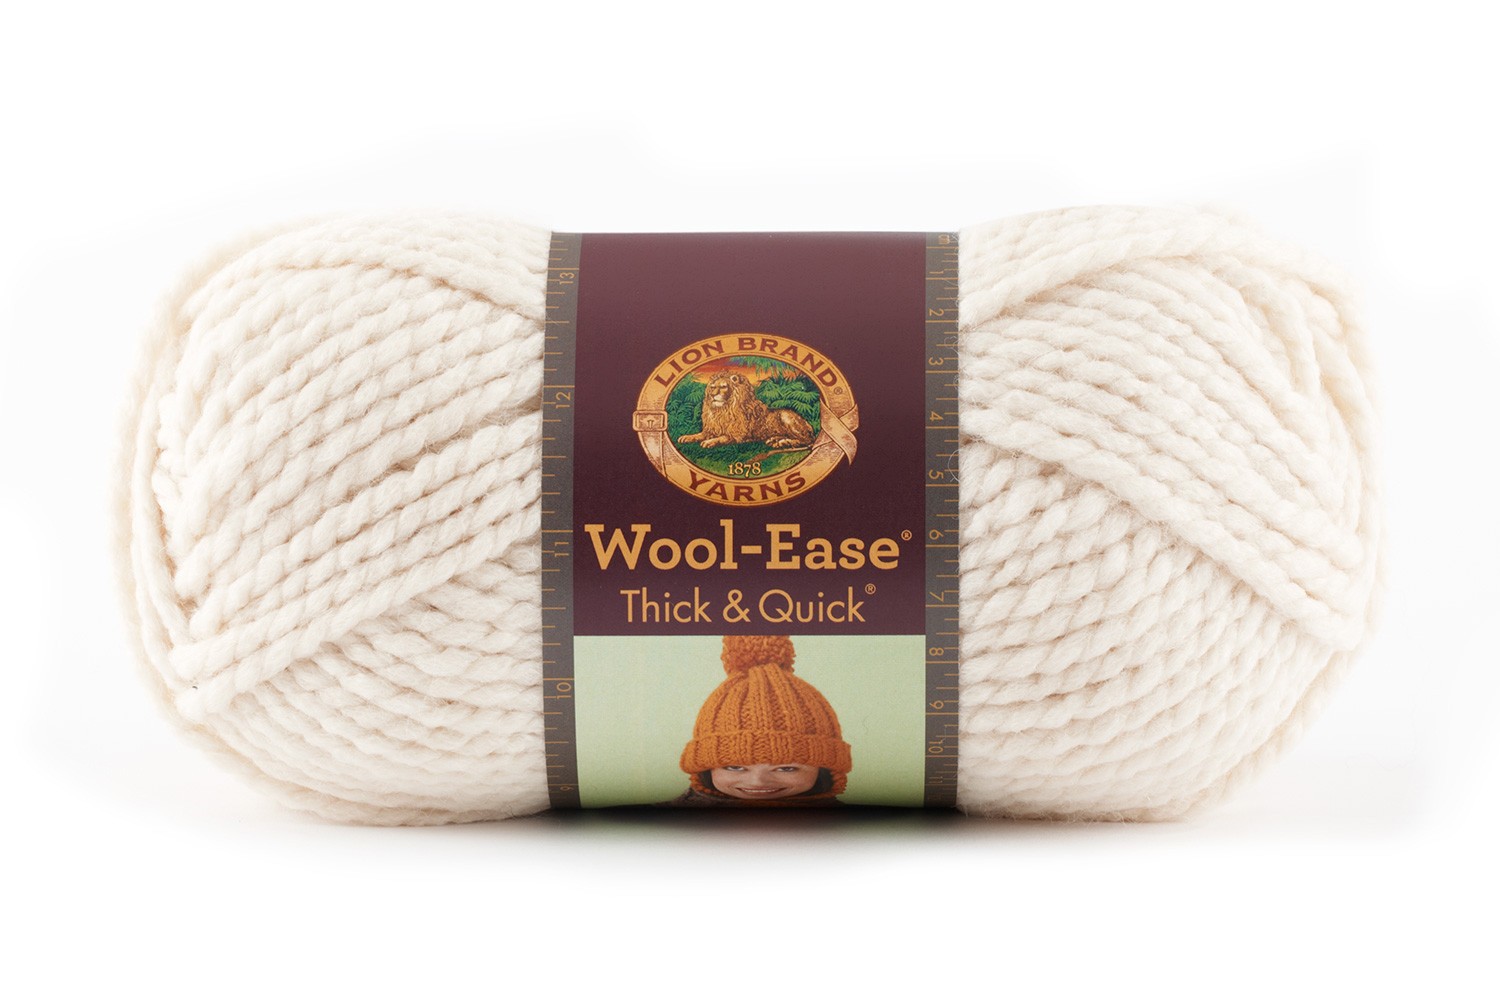 Lion Brand Yarn Wool-Ease Thick & Quick 640-099 Fisherman